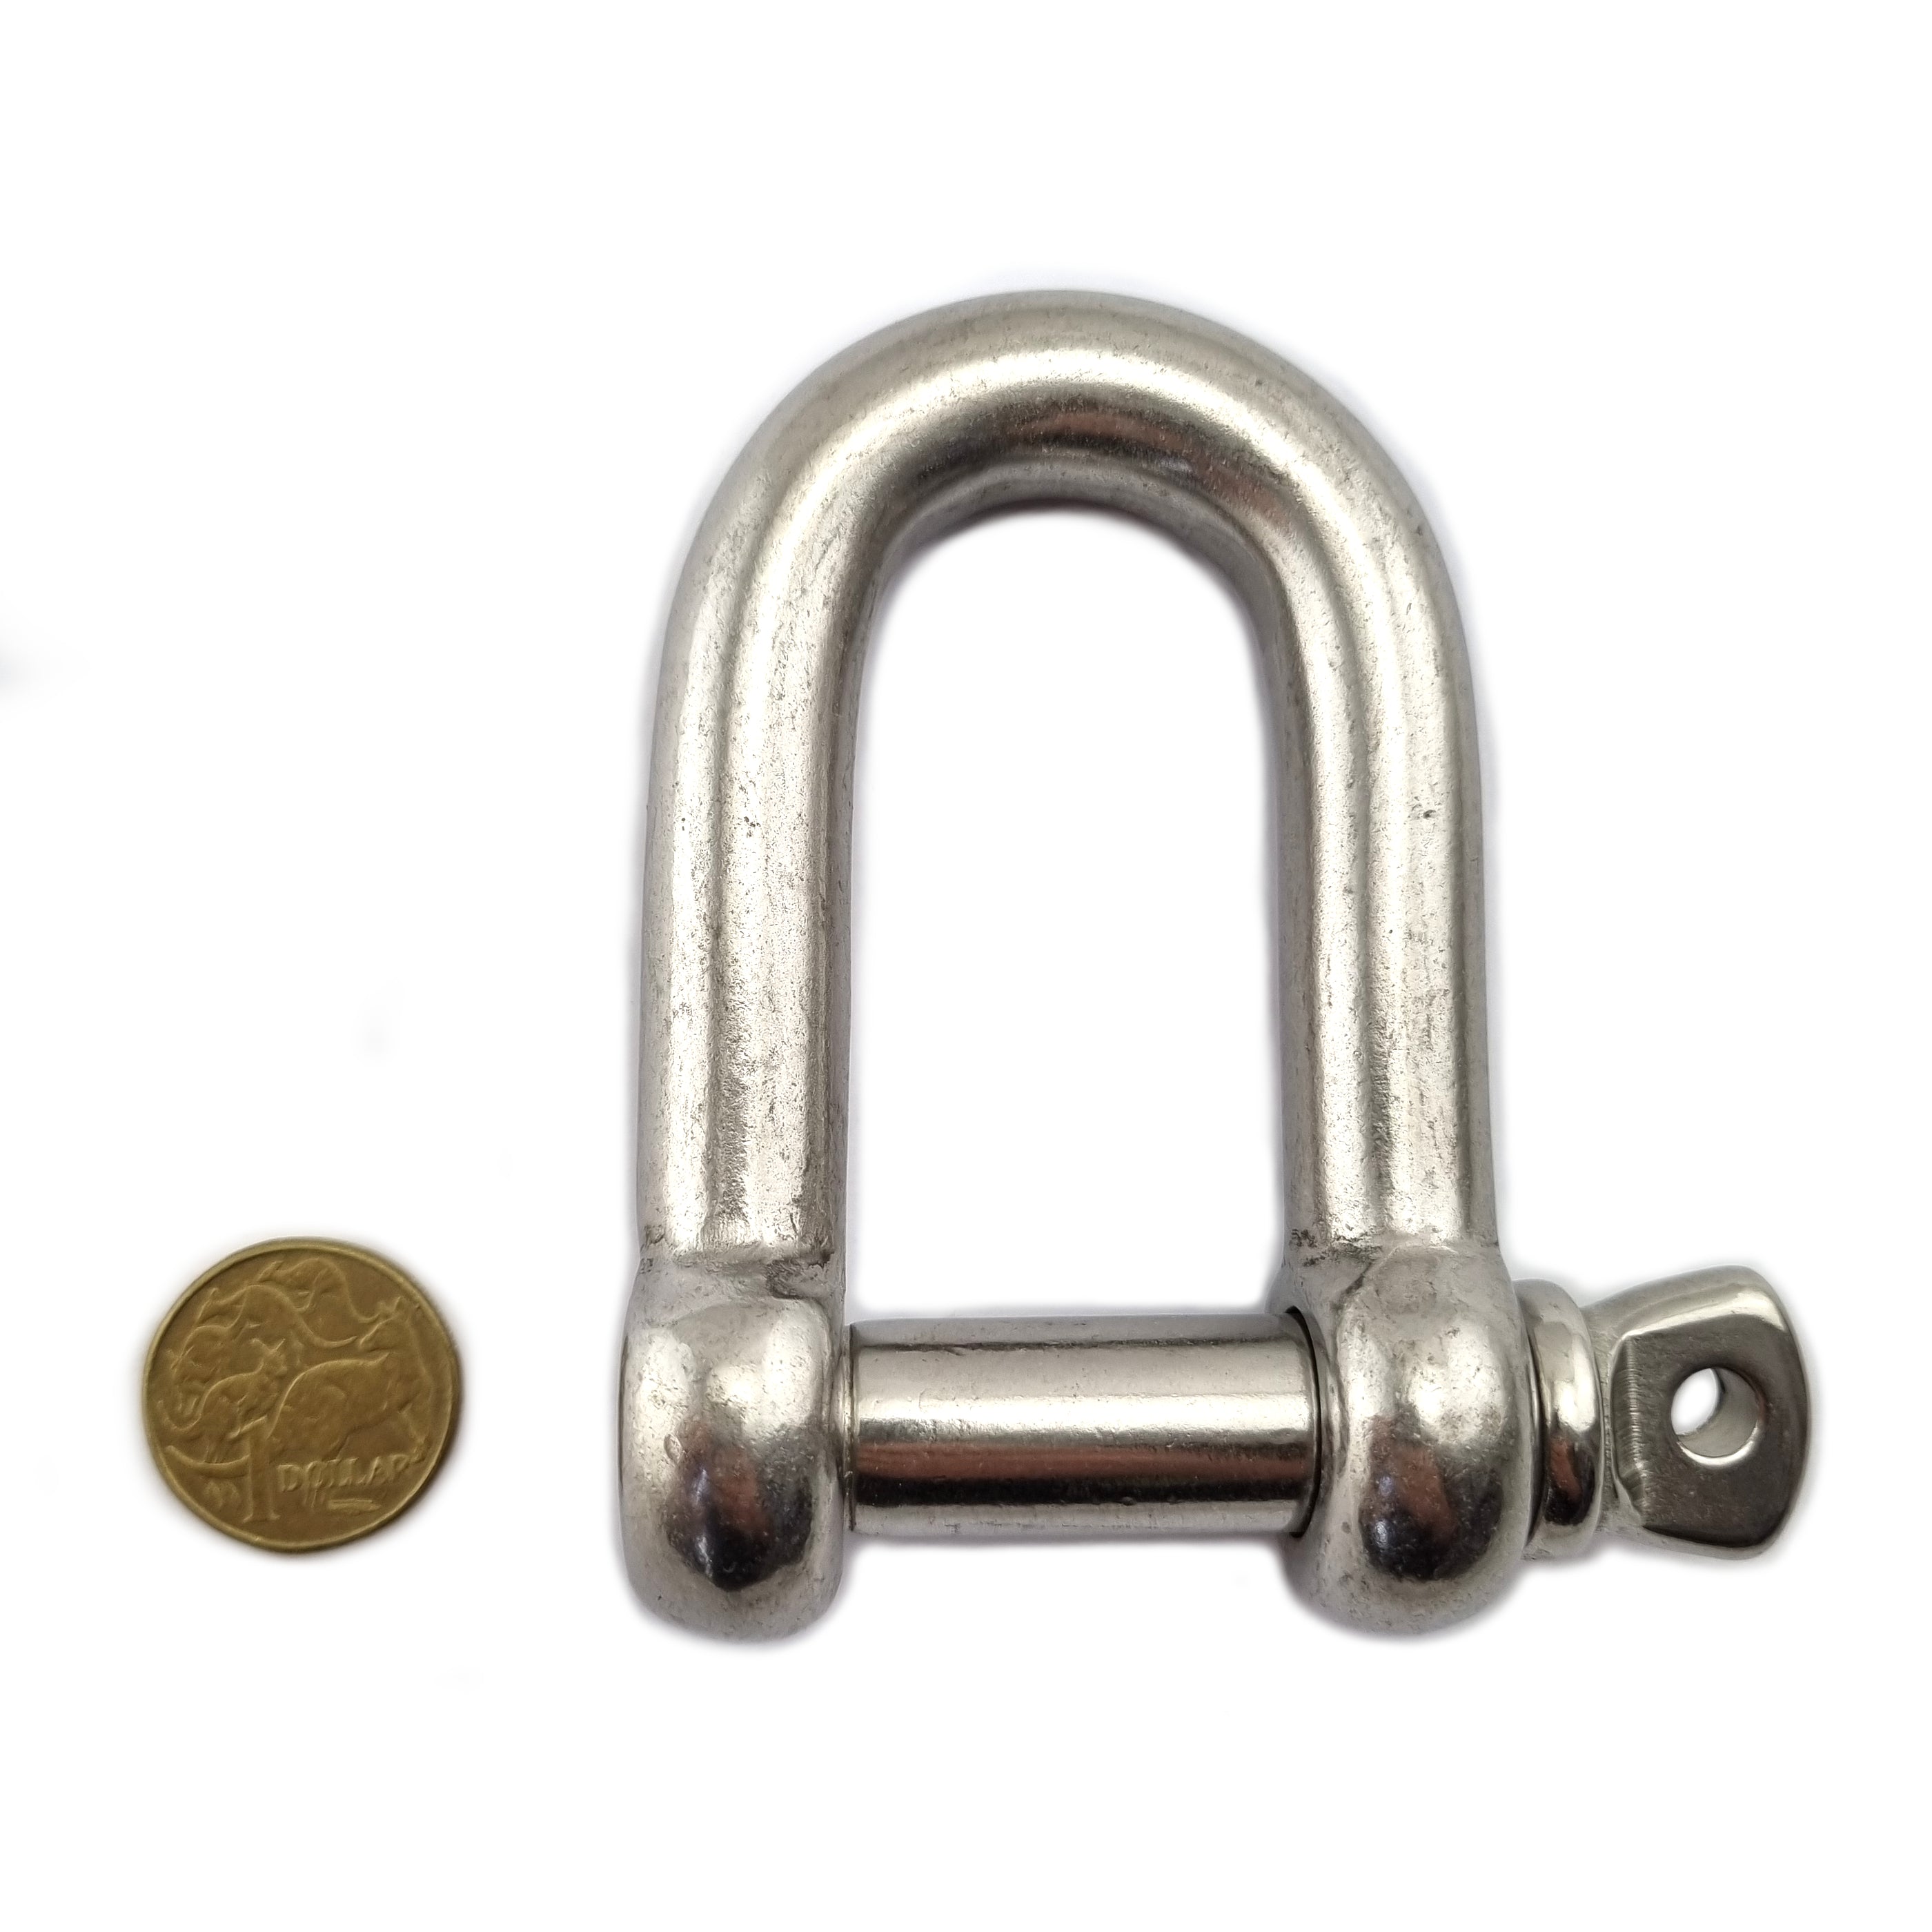 16mm D shackle in Marine-grade type 316 stainless steel. Shop chain.com.au